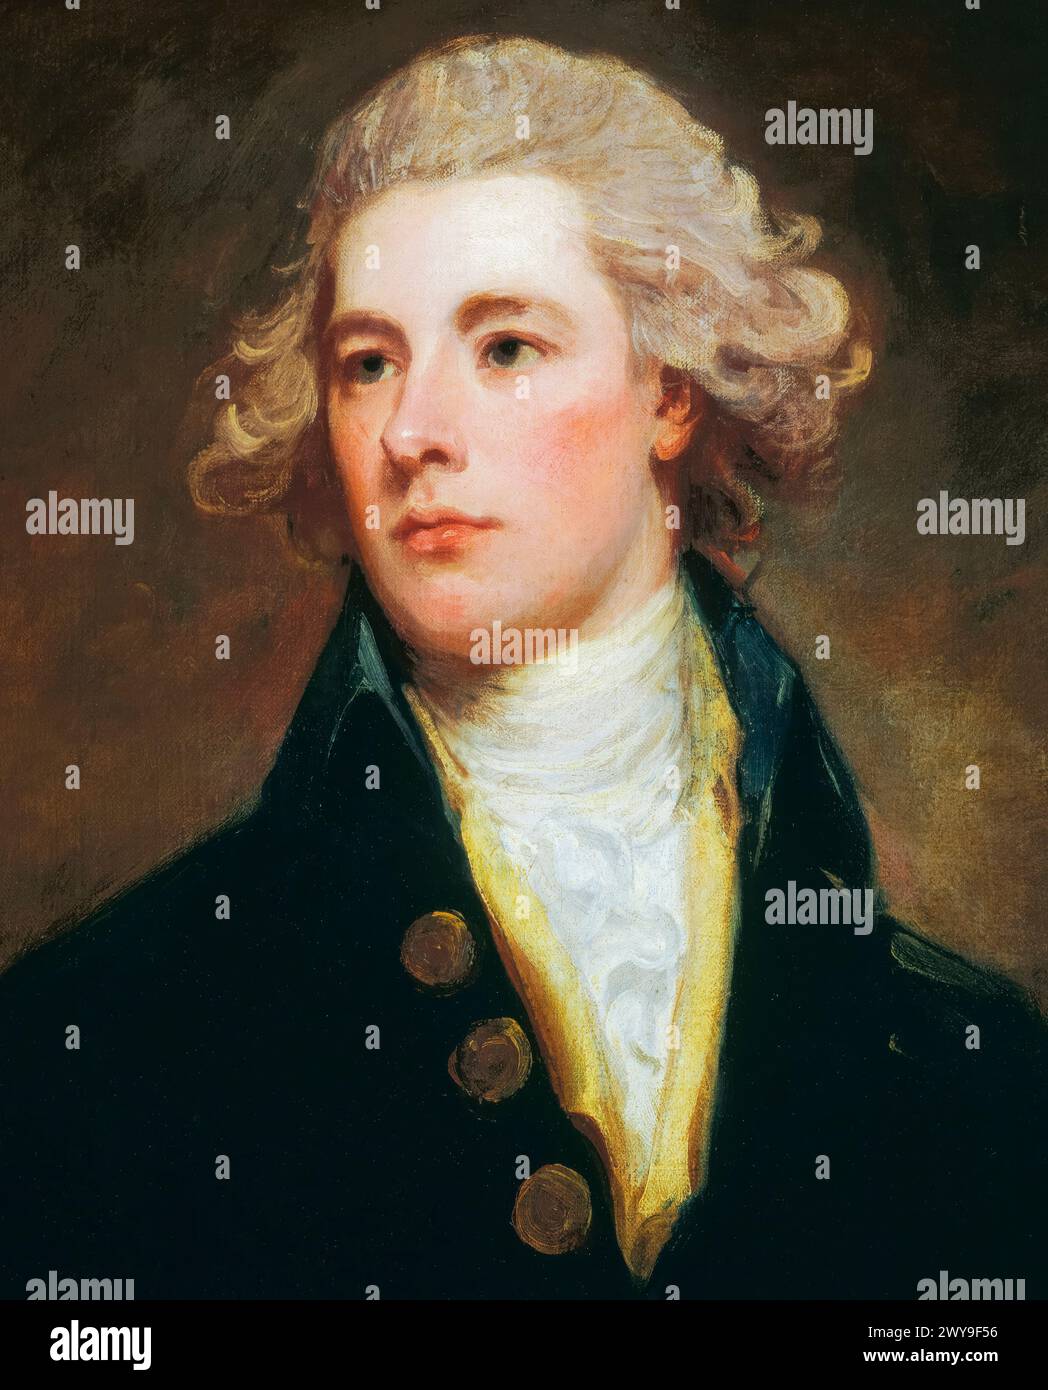 William Pitt the Younger (1759-1806), Prime Minister of Great Britain 1783-1800, Prime Minister of the United Kingdom January-March 1801 and 1804-1806, portrait painting in oil on canvas by George Romney, circa 1783 Stock Photo